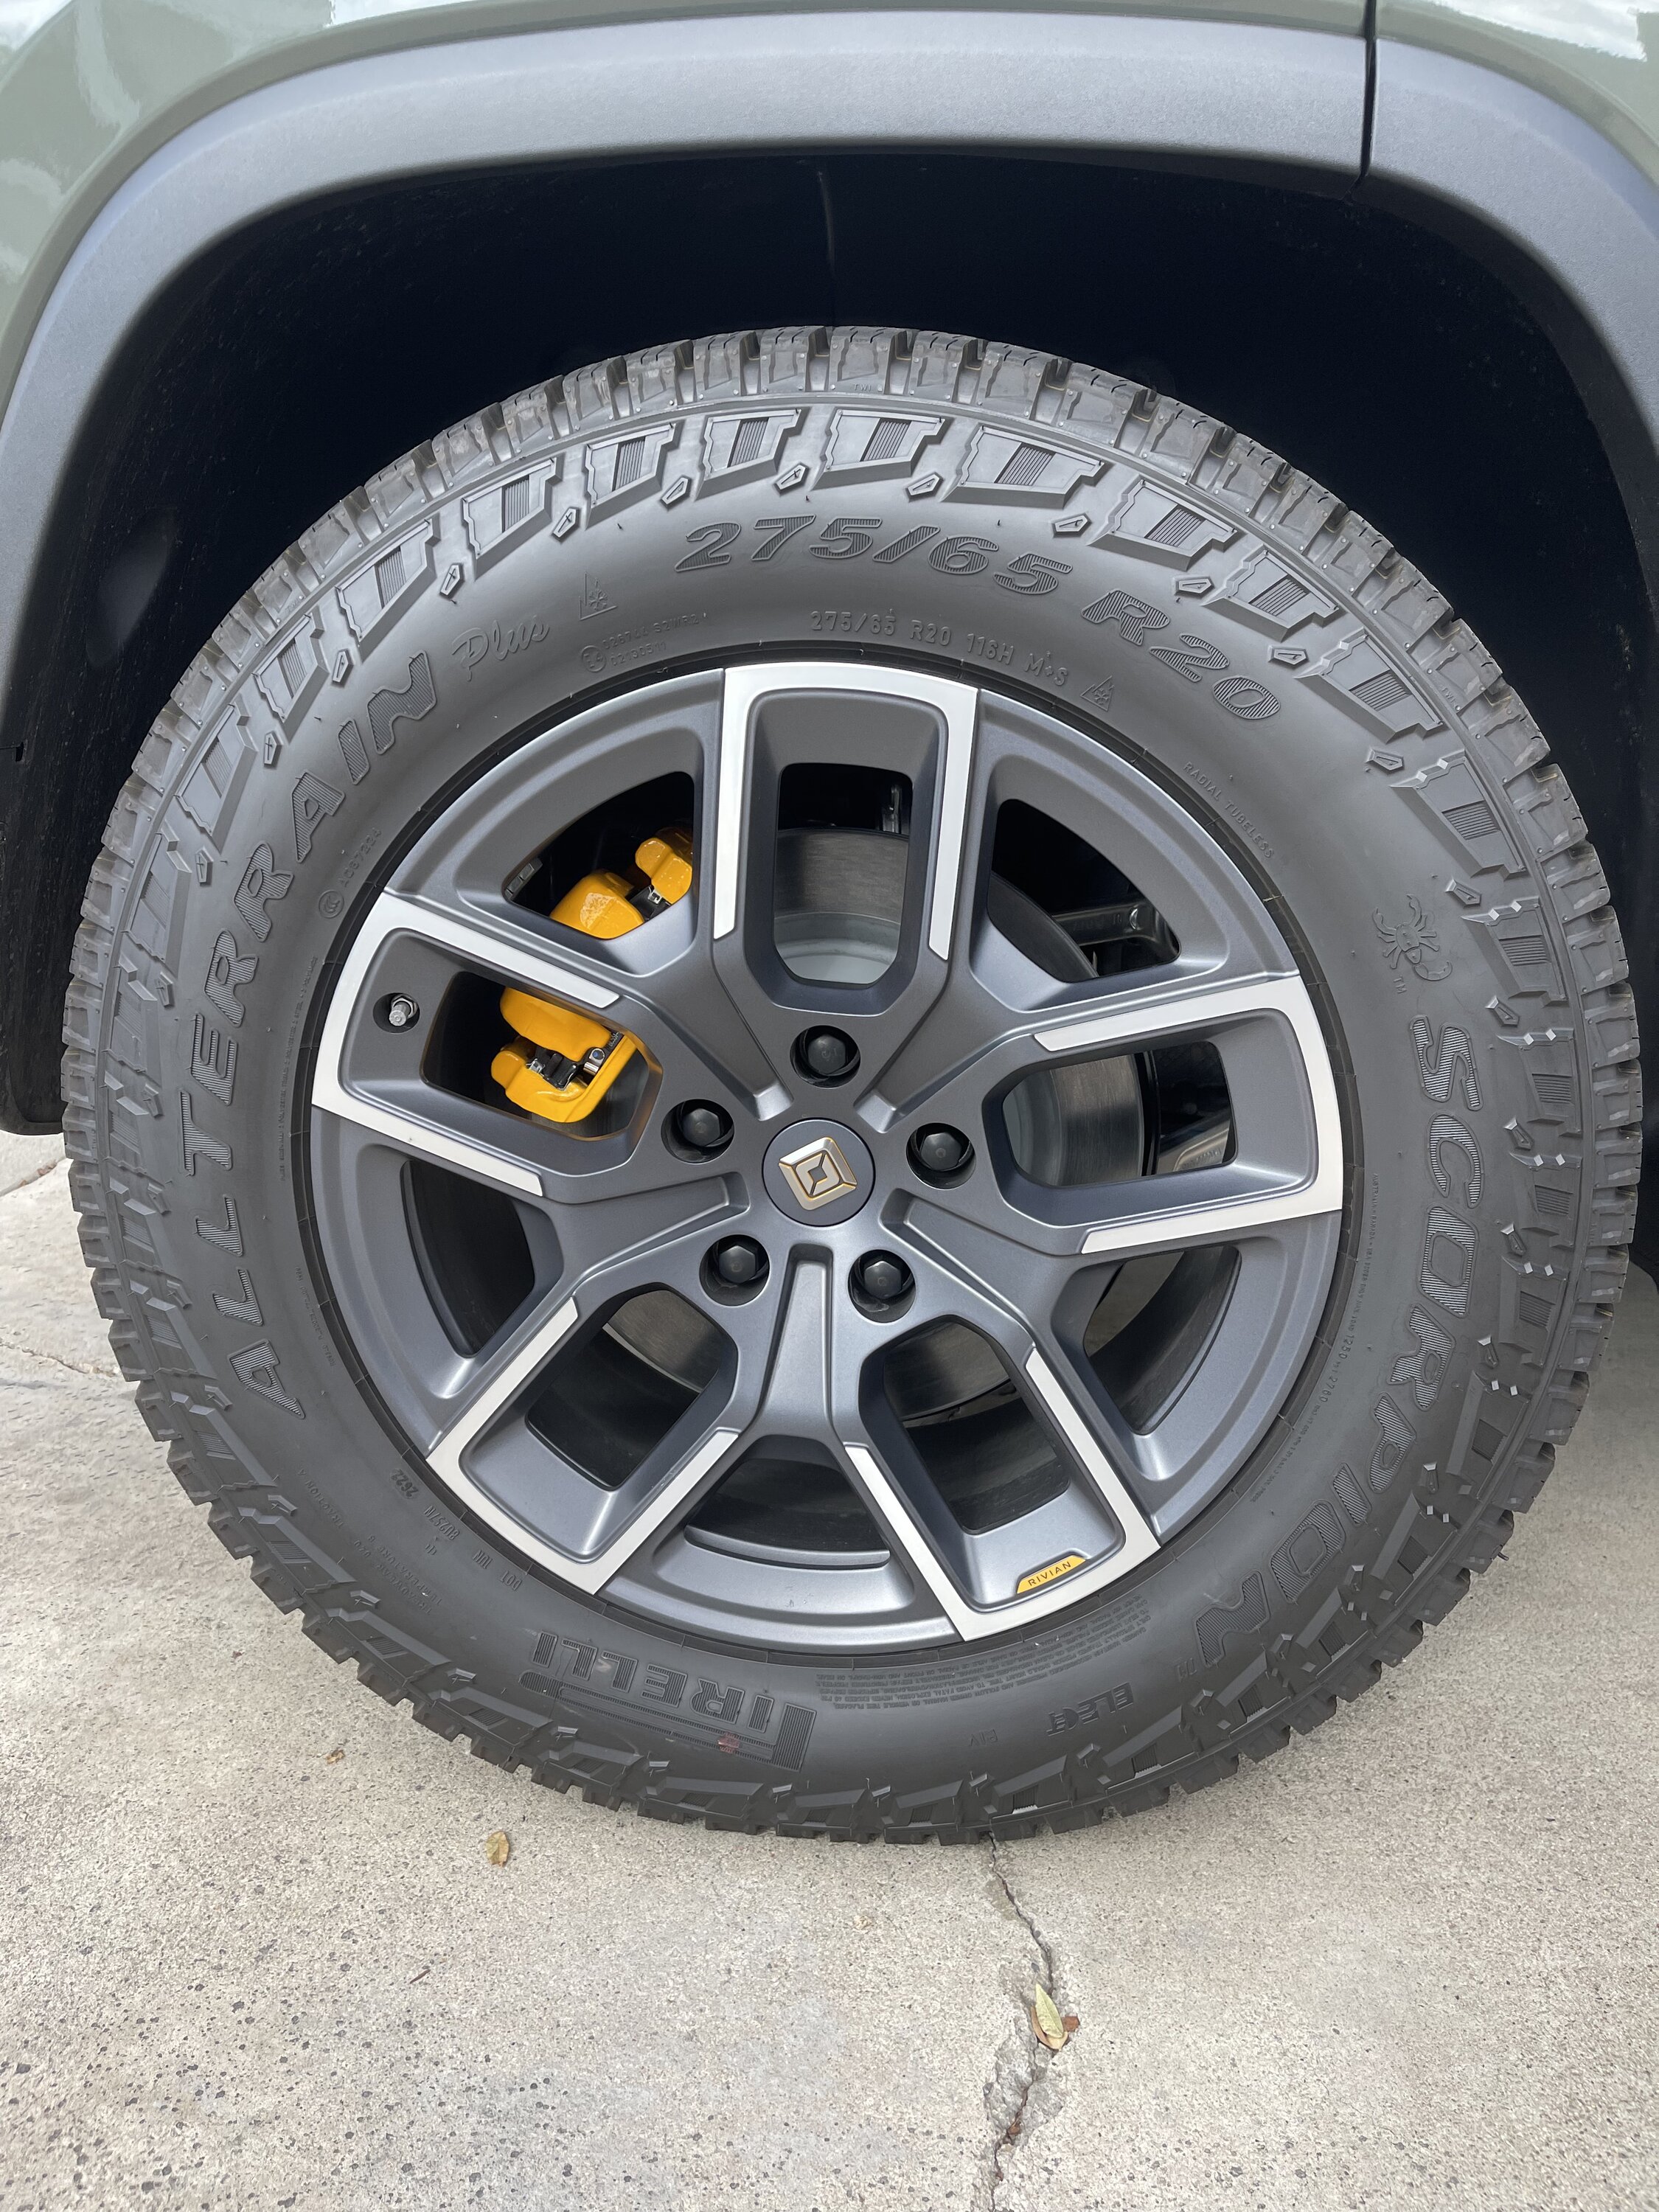 Rivian R1T R1S Changed A/T Bright Wheels to Glossy Black using Vinyl Decals tempImagecUxx39